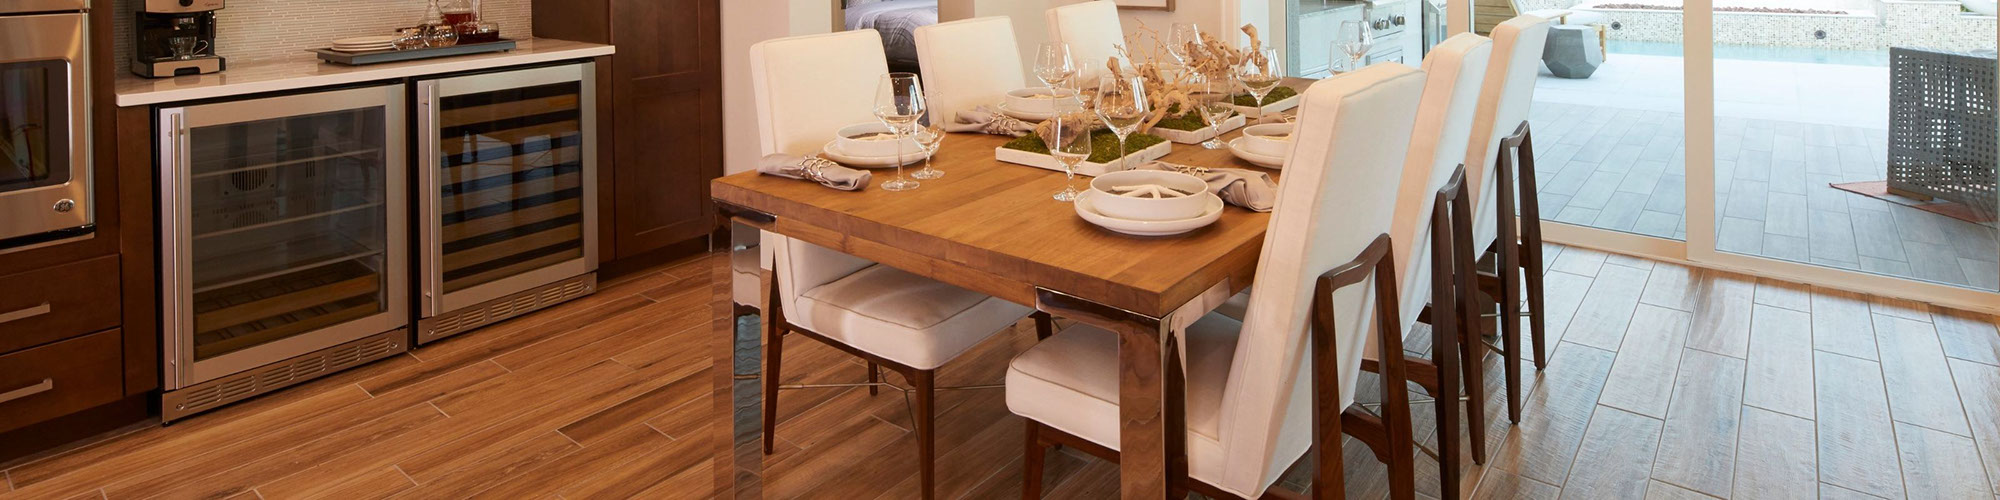 Dining room with floor tile that looks like wood flooring, wood table and white cushioned chairs, white place settings, stemmed wine & water glasses.